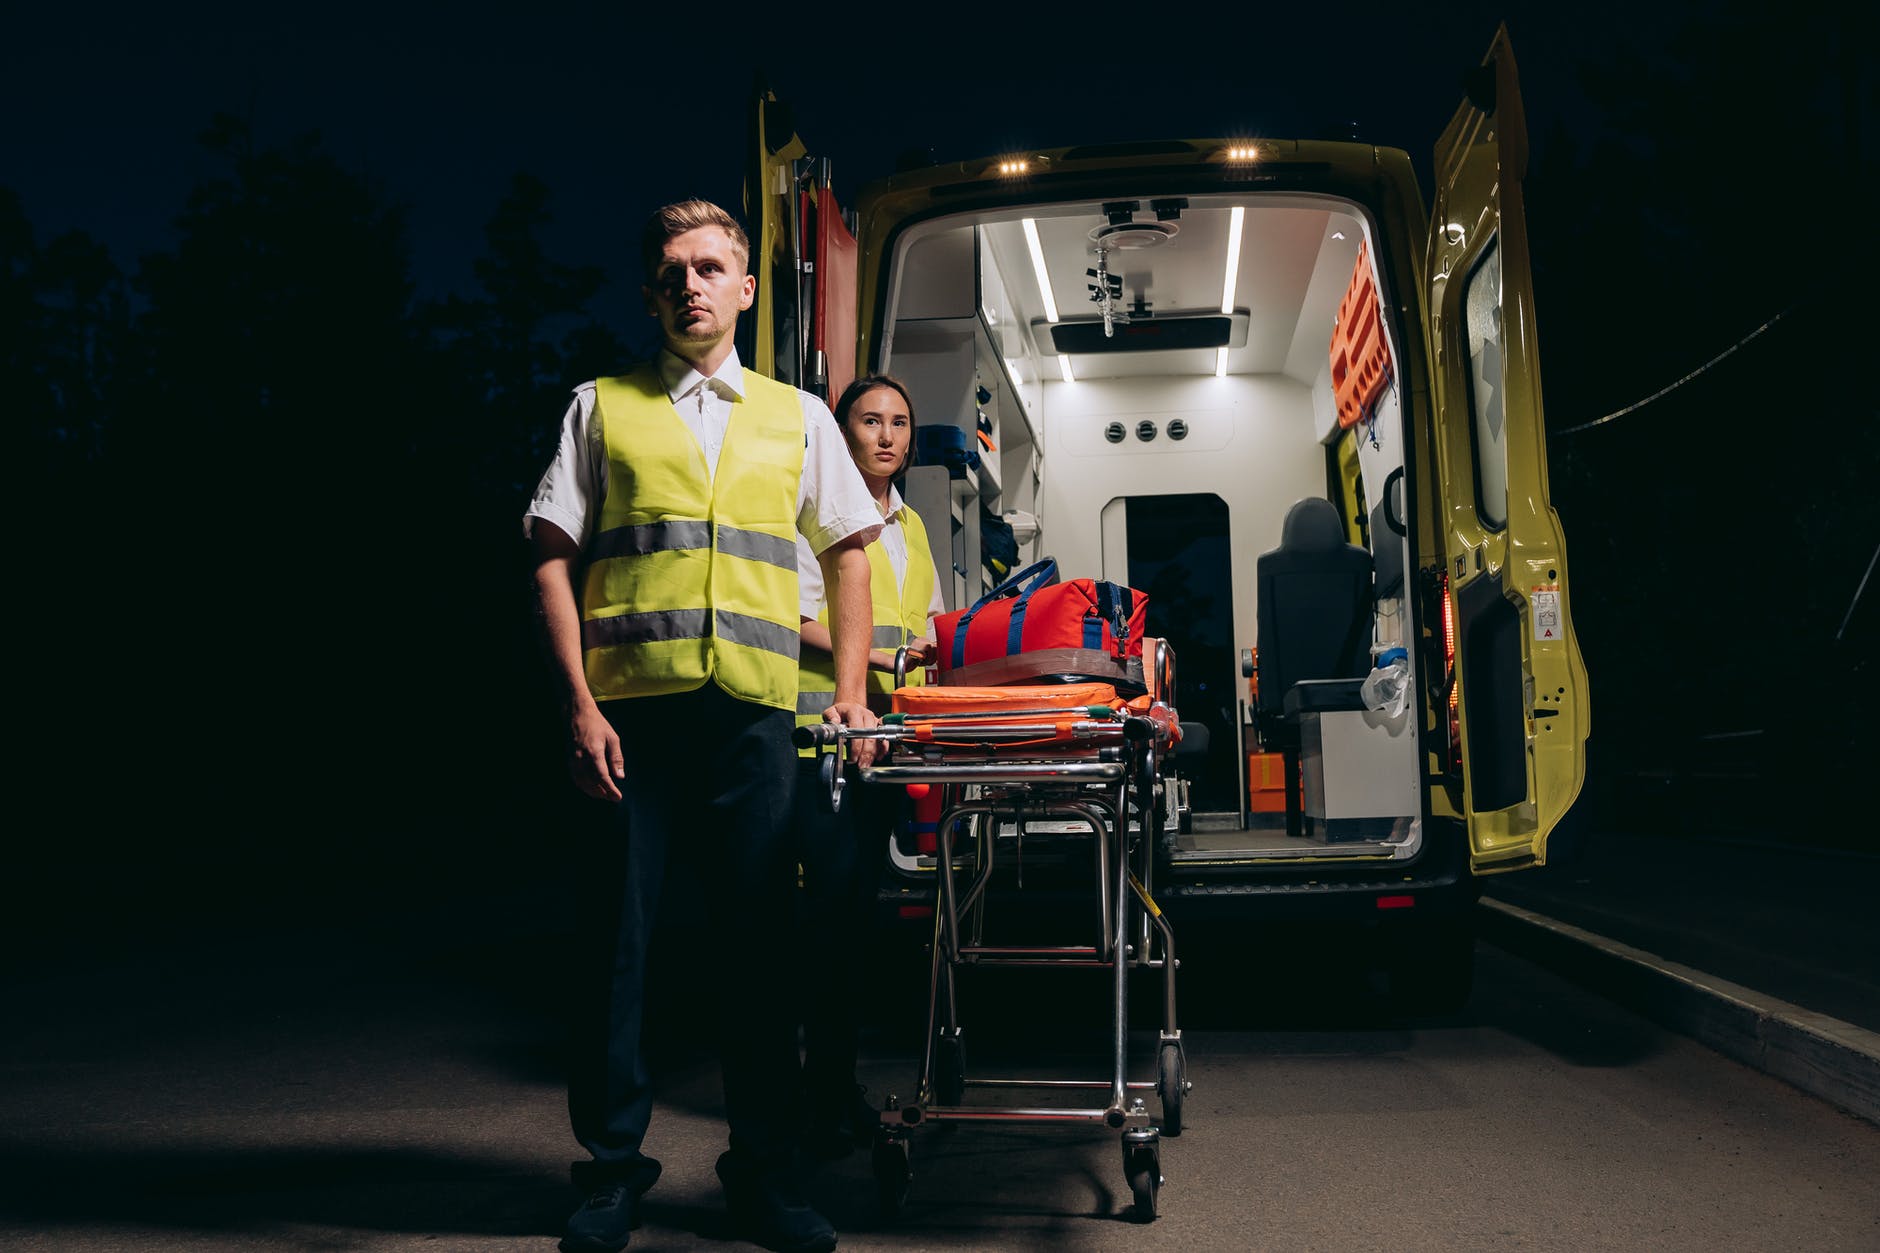 The paramedics told the adults to follow them to the hospital. | Source: Pexels